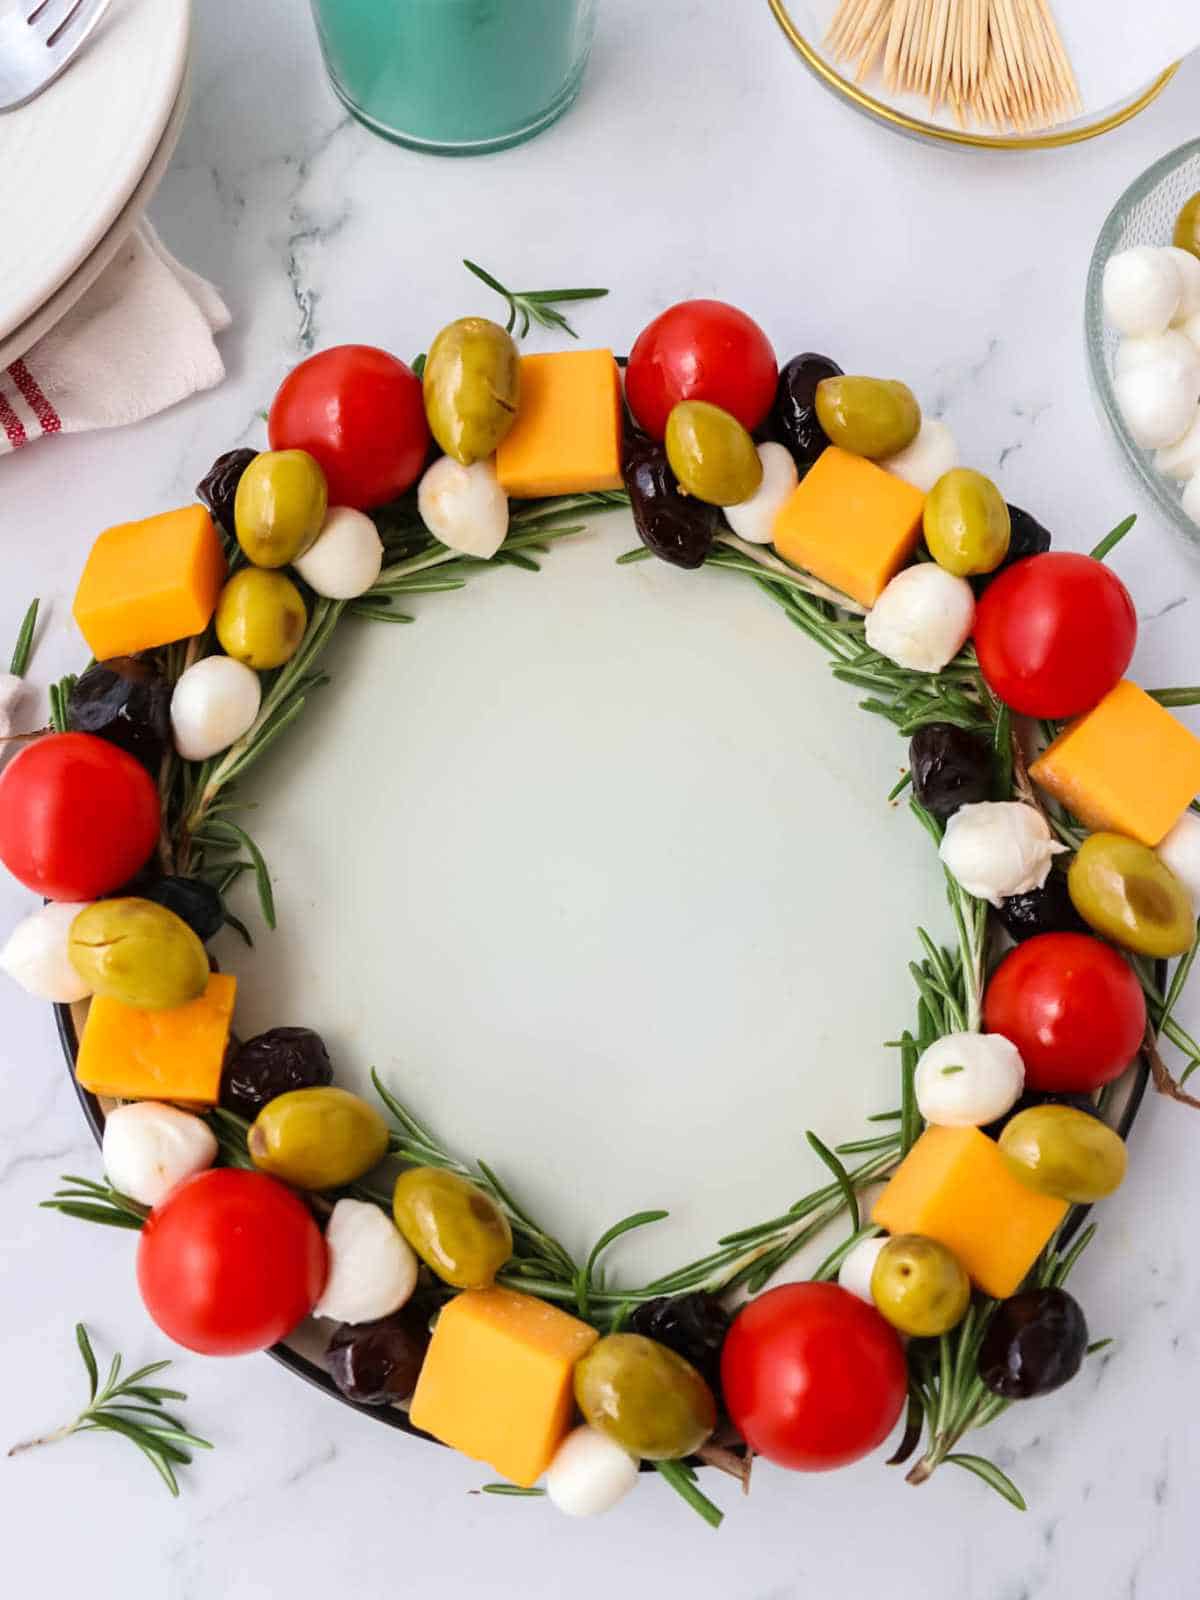 green olives added to holiday appetizer wreath.